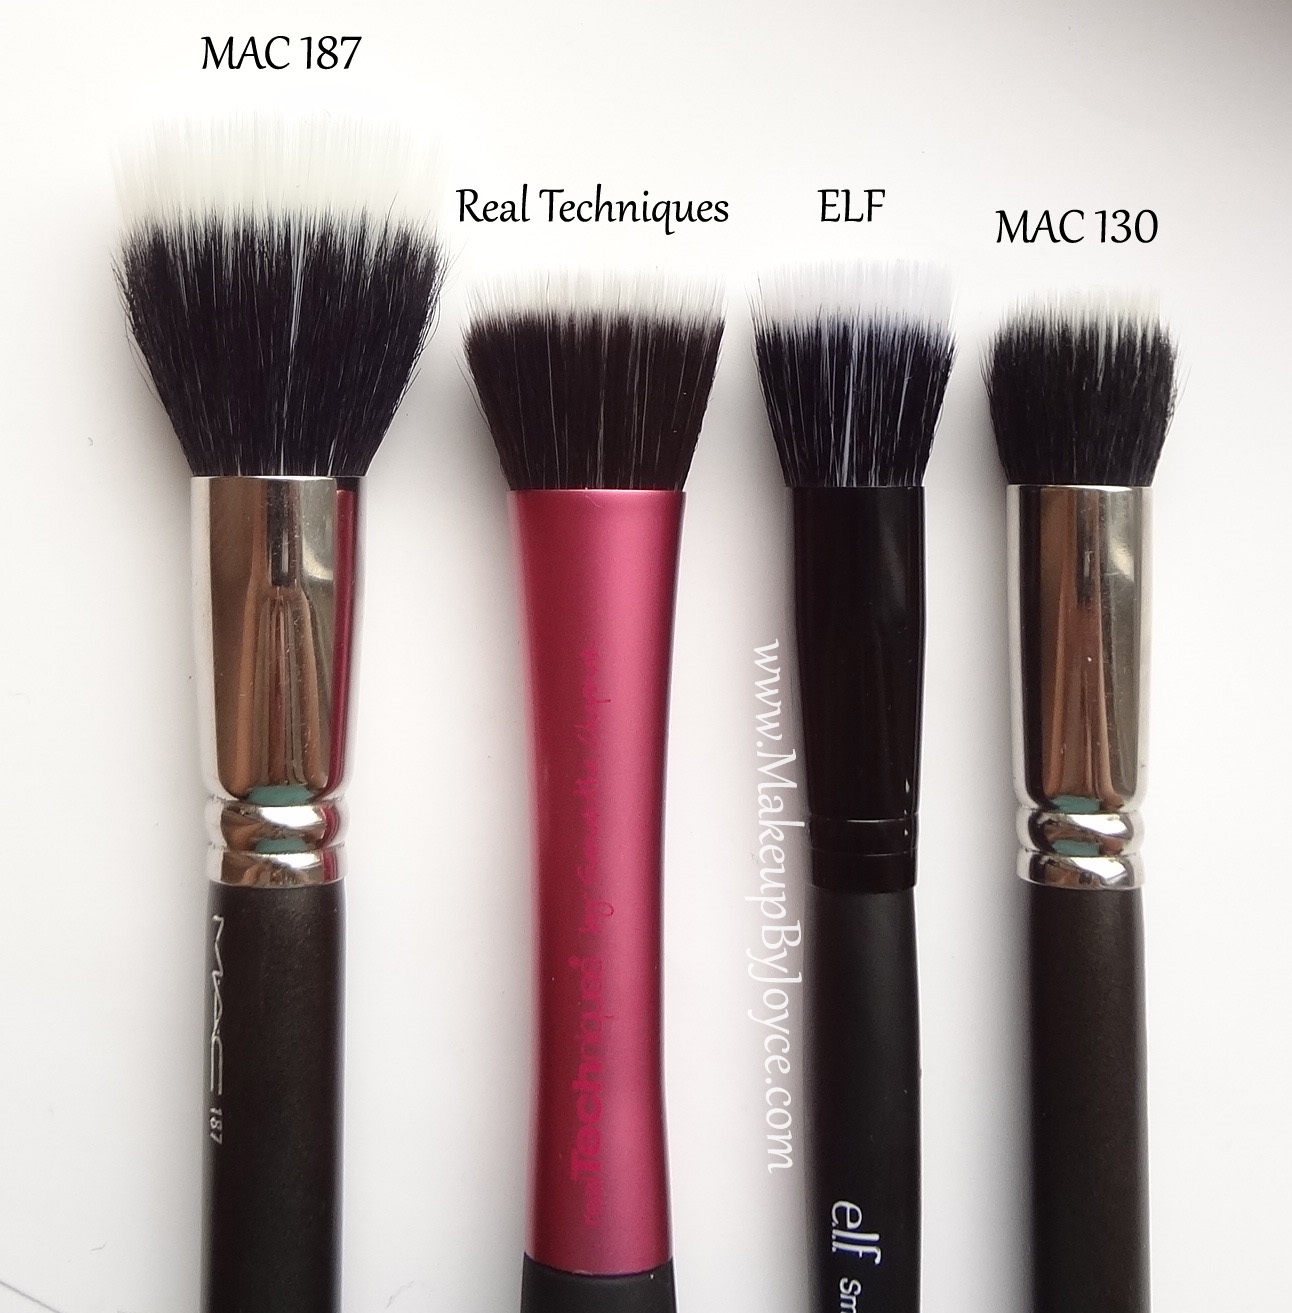 ❤ MakeupByJoyce ❤** !: Review + Comparison: ELF Studio Brush Collection